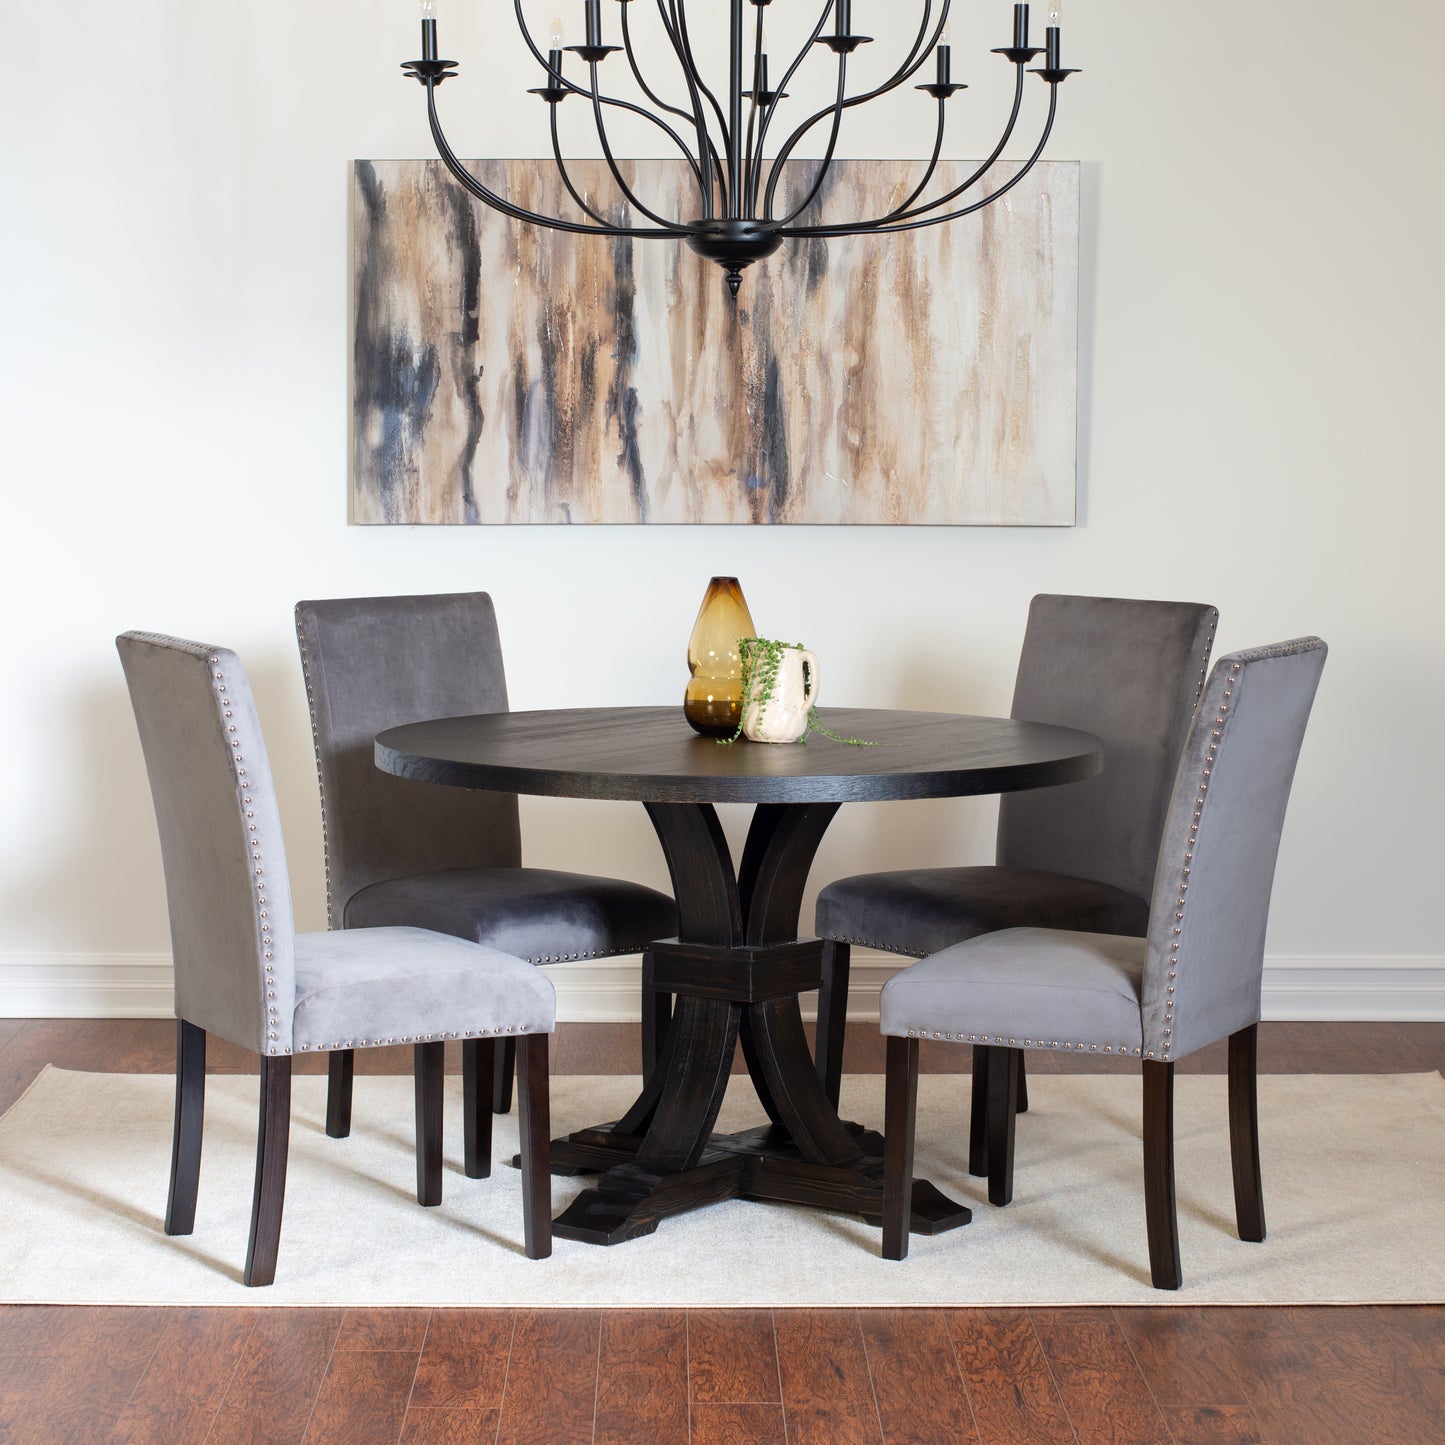 Quinlan 5-piece Dining Set, Distressed Pedestal Round Table with 4 Stylish Chairs